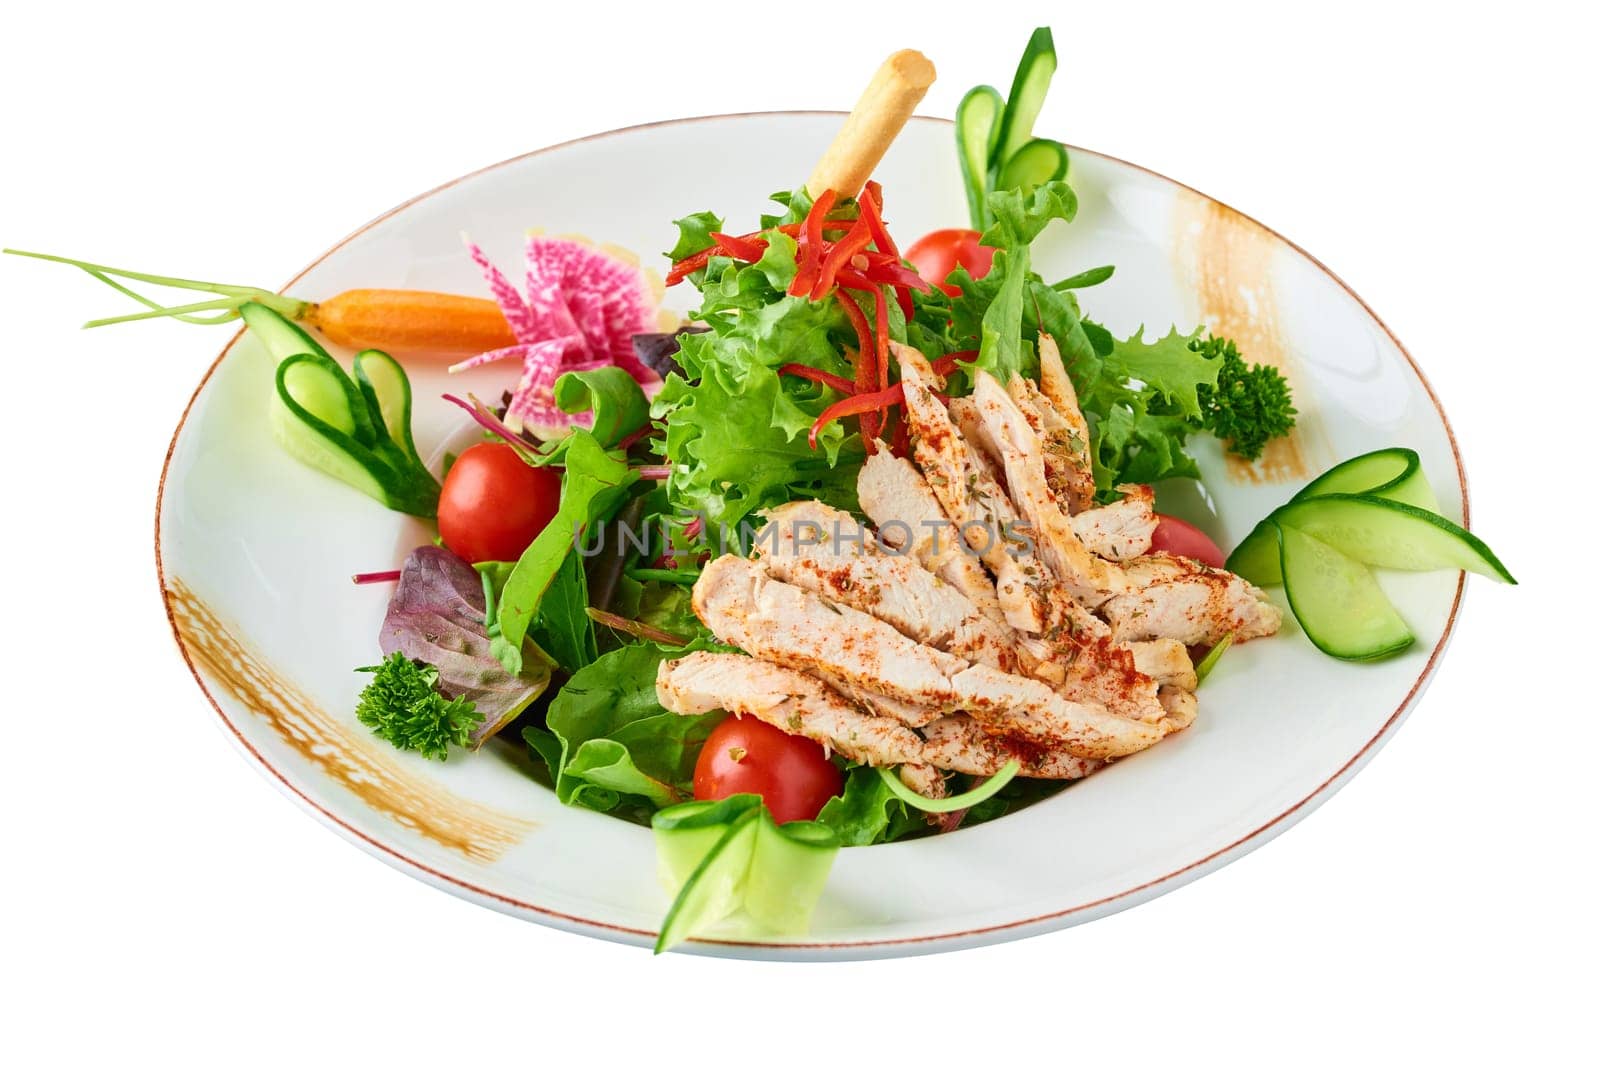 Fresh salad with grilled chicken breast, arugula and tomato. Top view